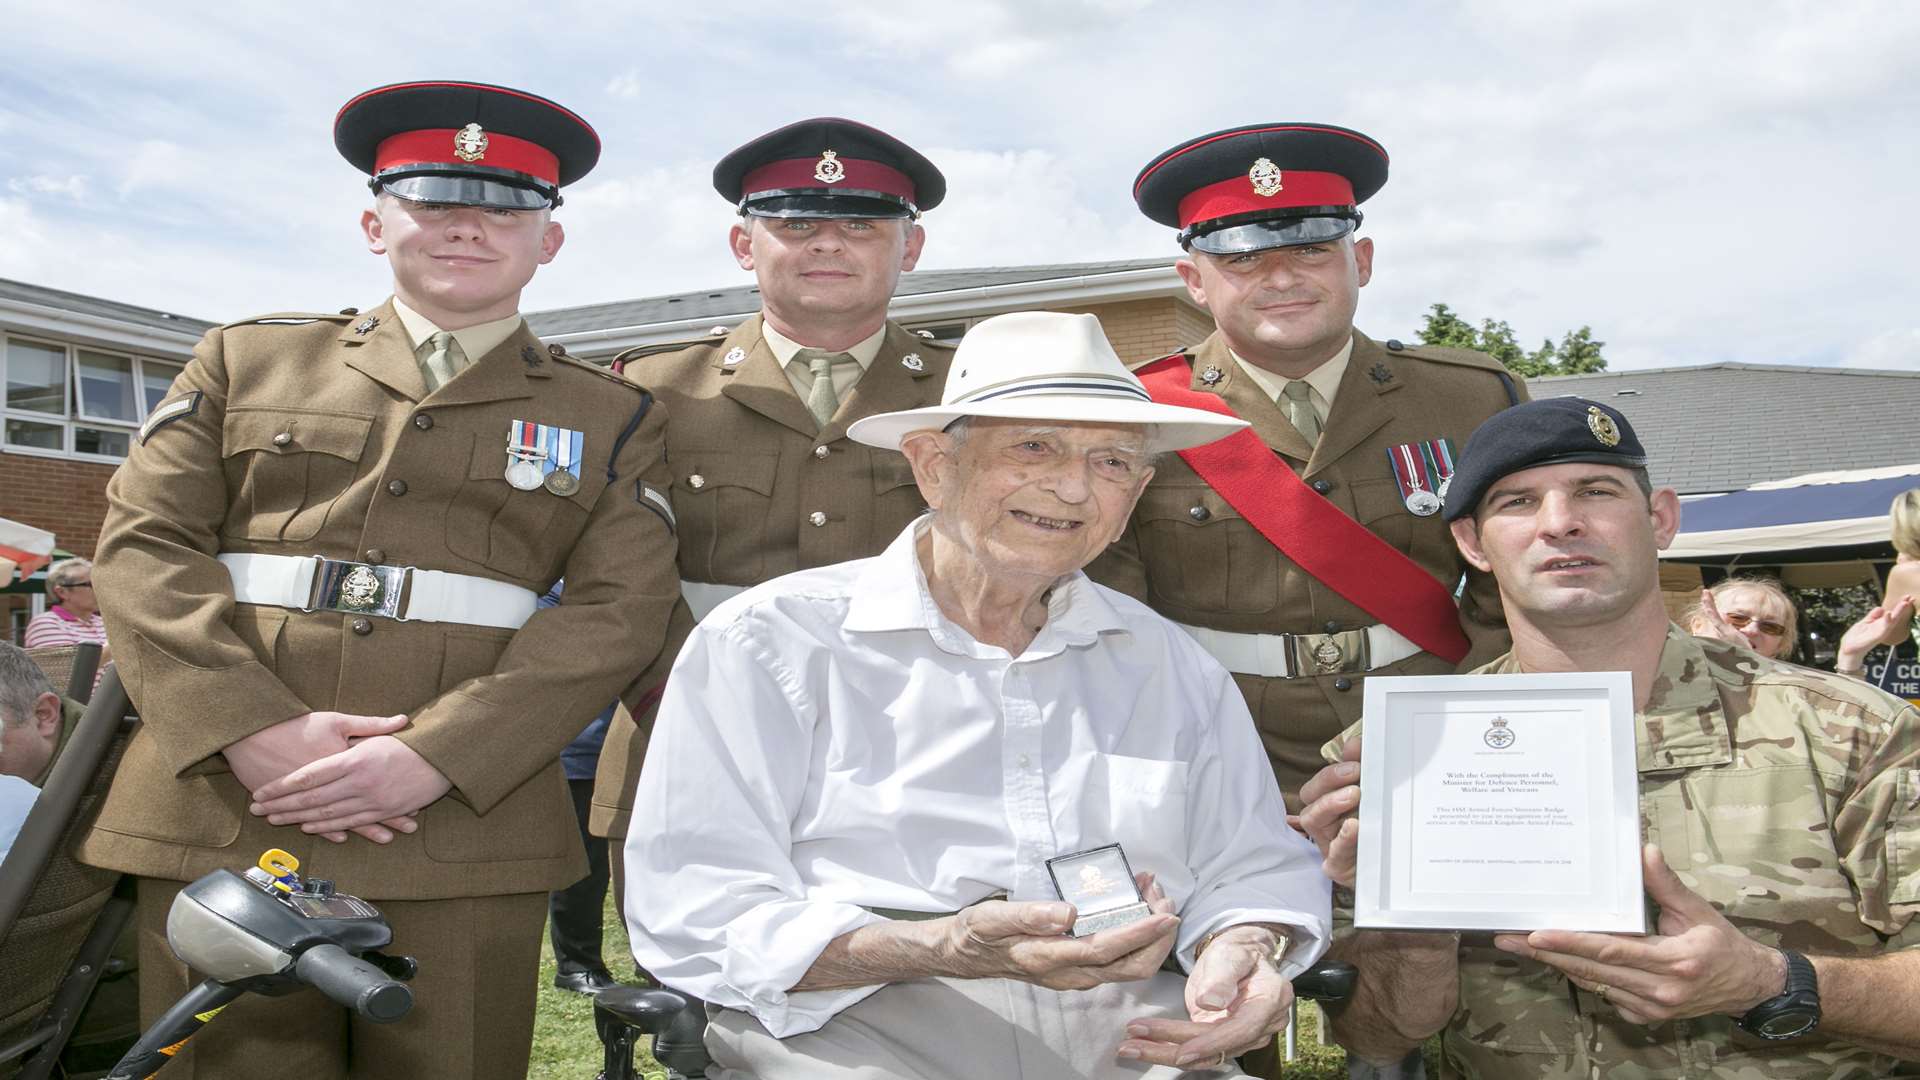 Leonard French gets his award from Cpl Tony Field, Lance Cpl Tony Goode, Lance CPL Martin Purdie, Sgt Rob D Phillips In recognition of his contribution to HM Armed Forces